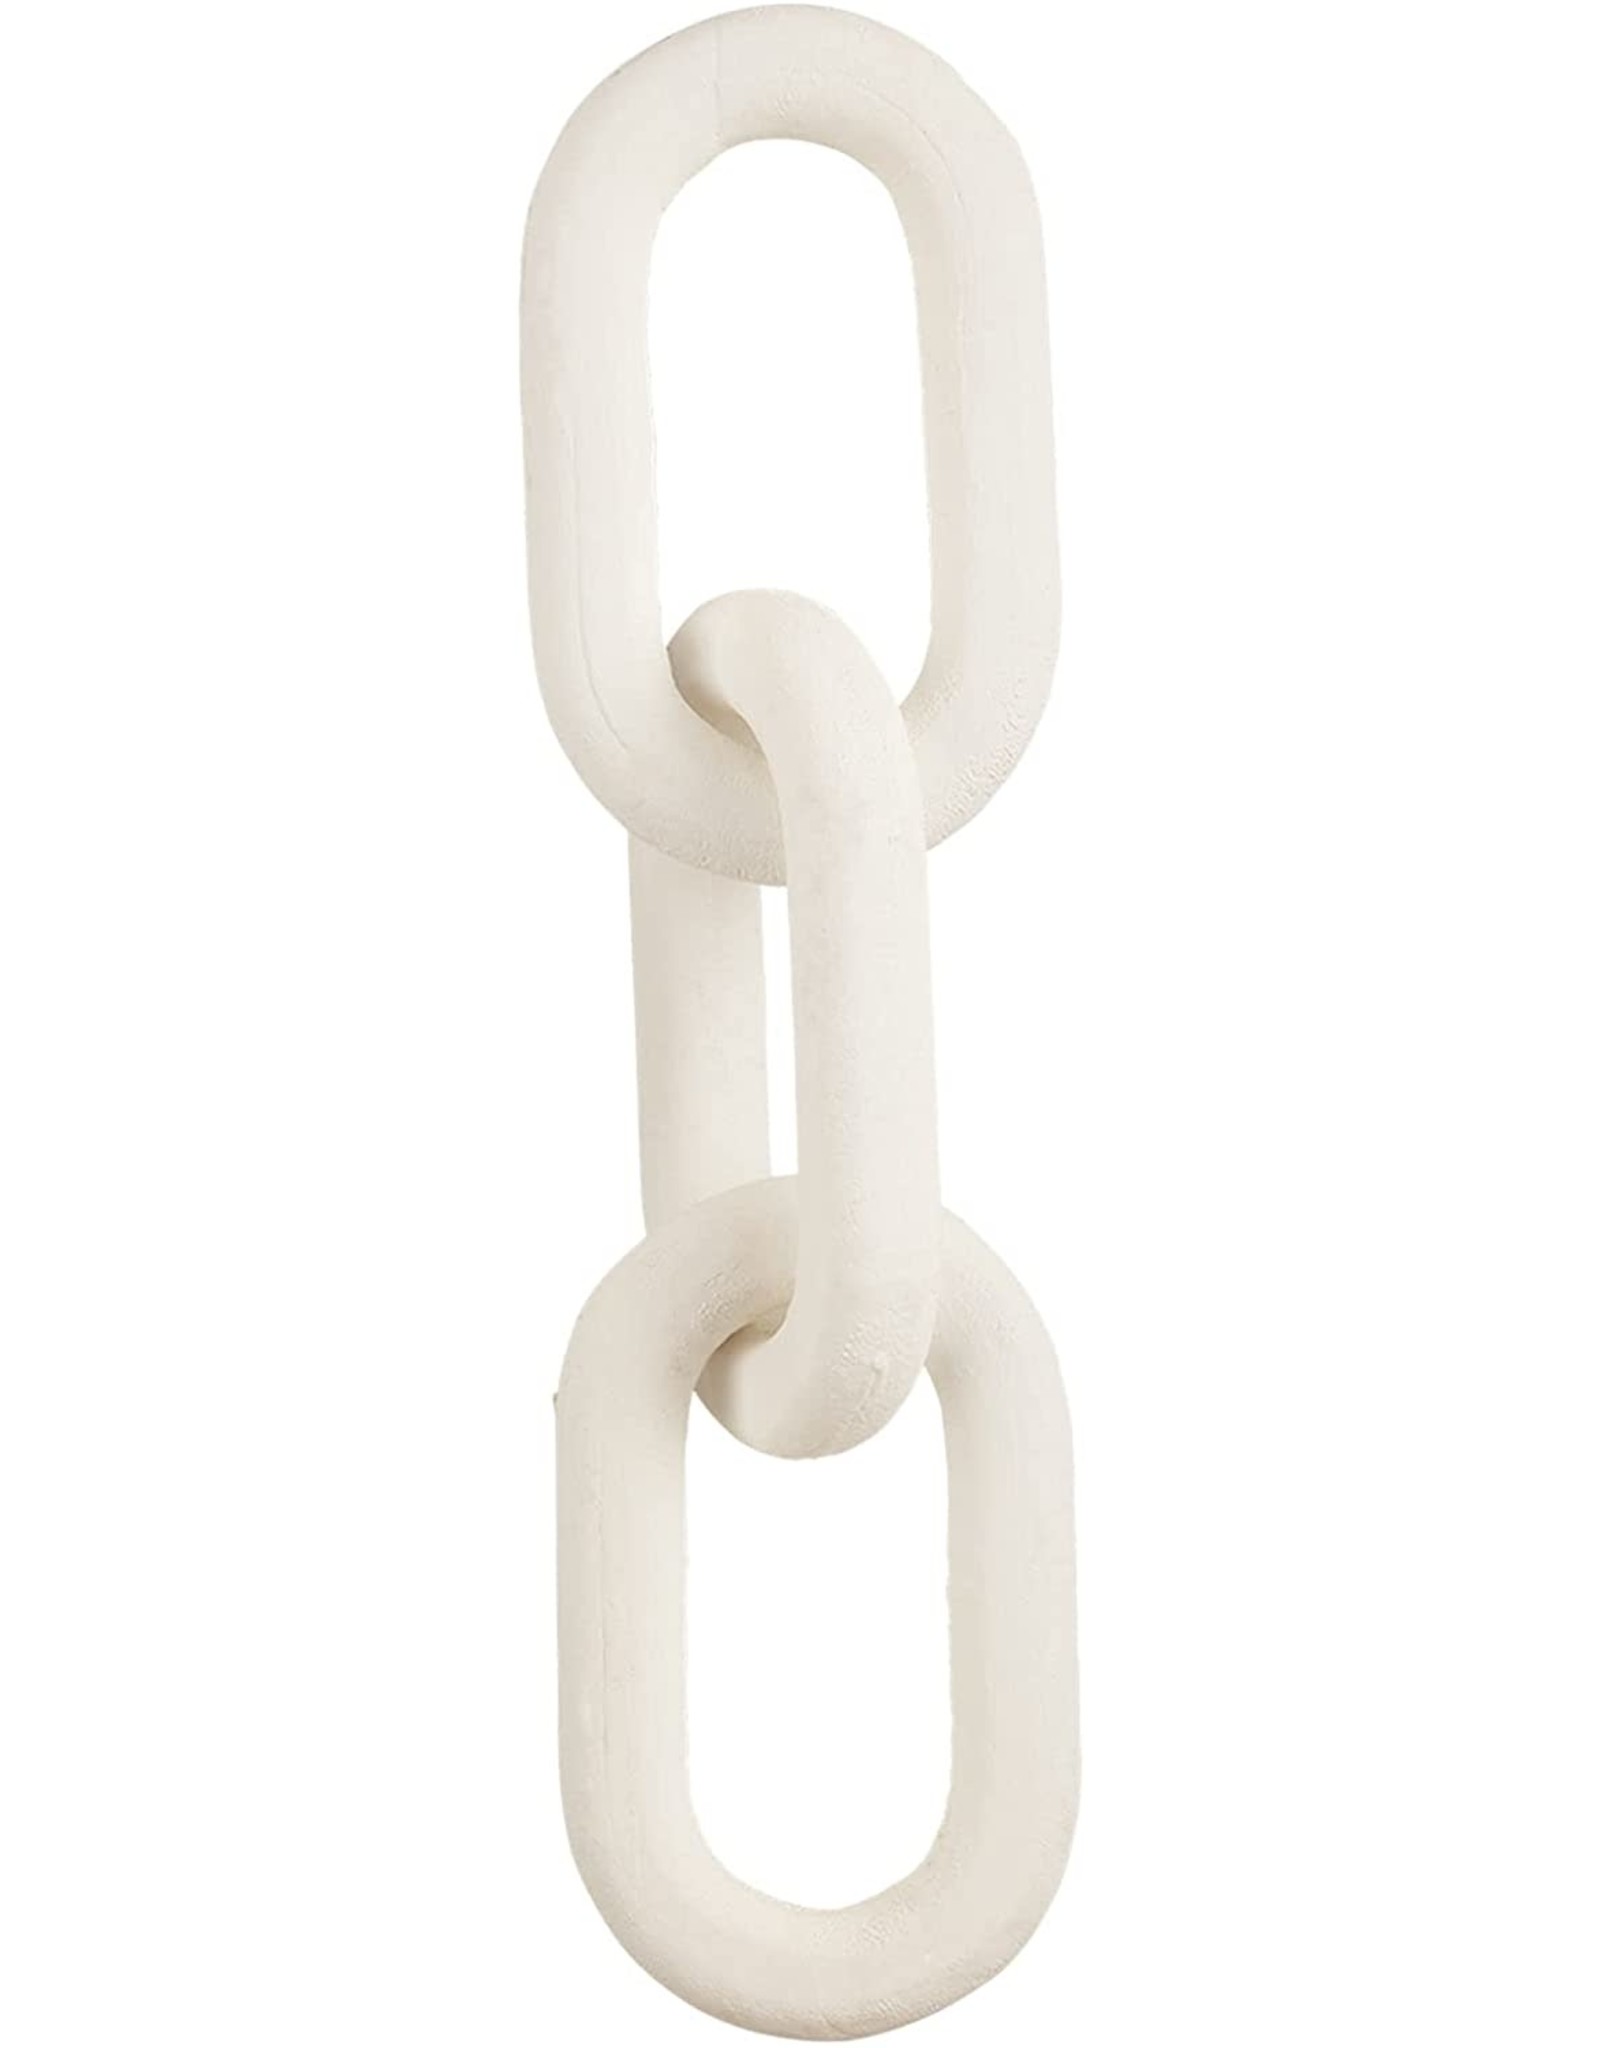 Mud Pie Wooden Chain Link Decor In White One Set of 3 Joined Links